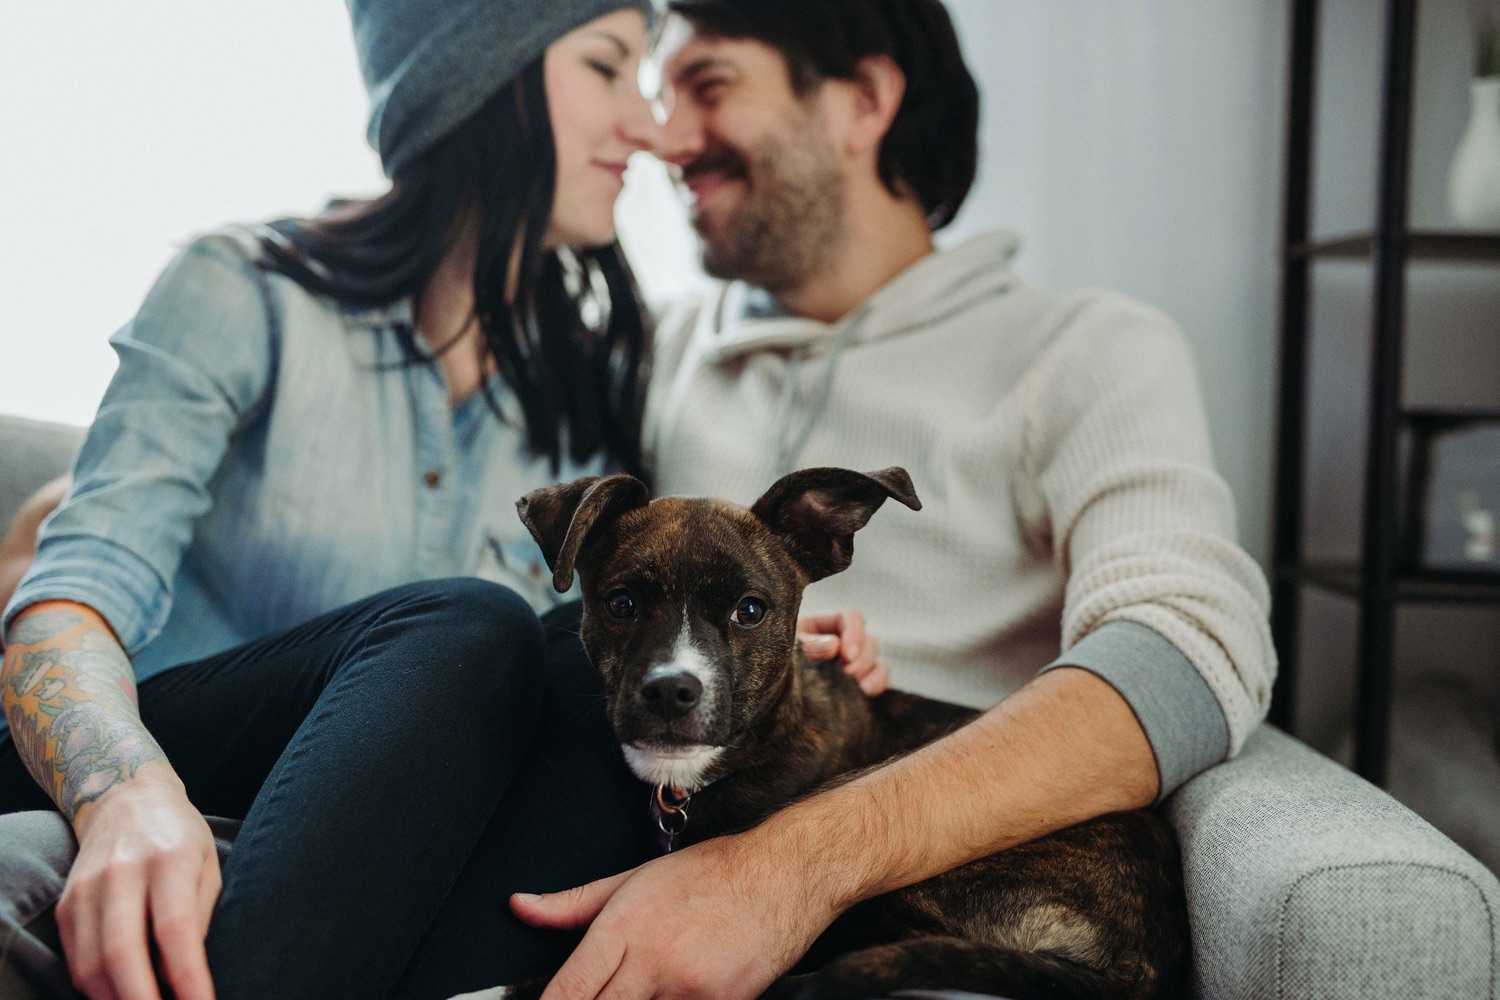 couple cuddling on the couch in home session with dog